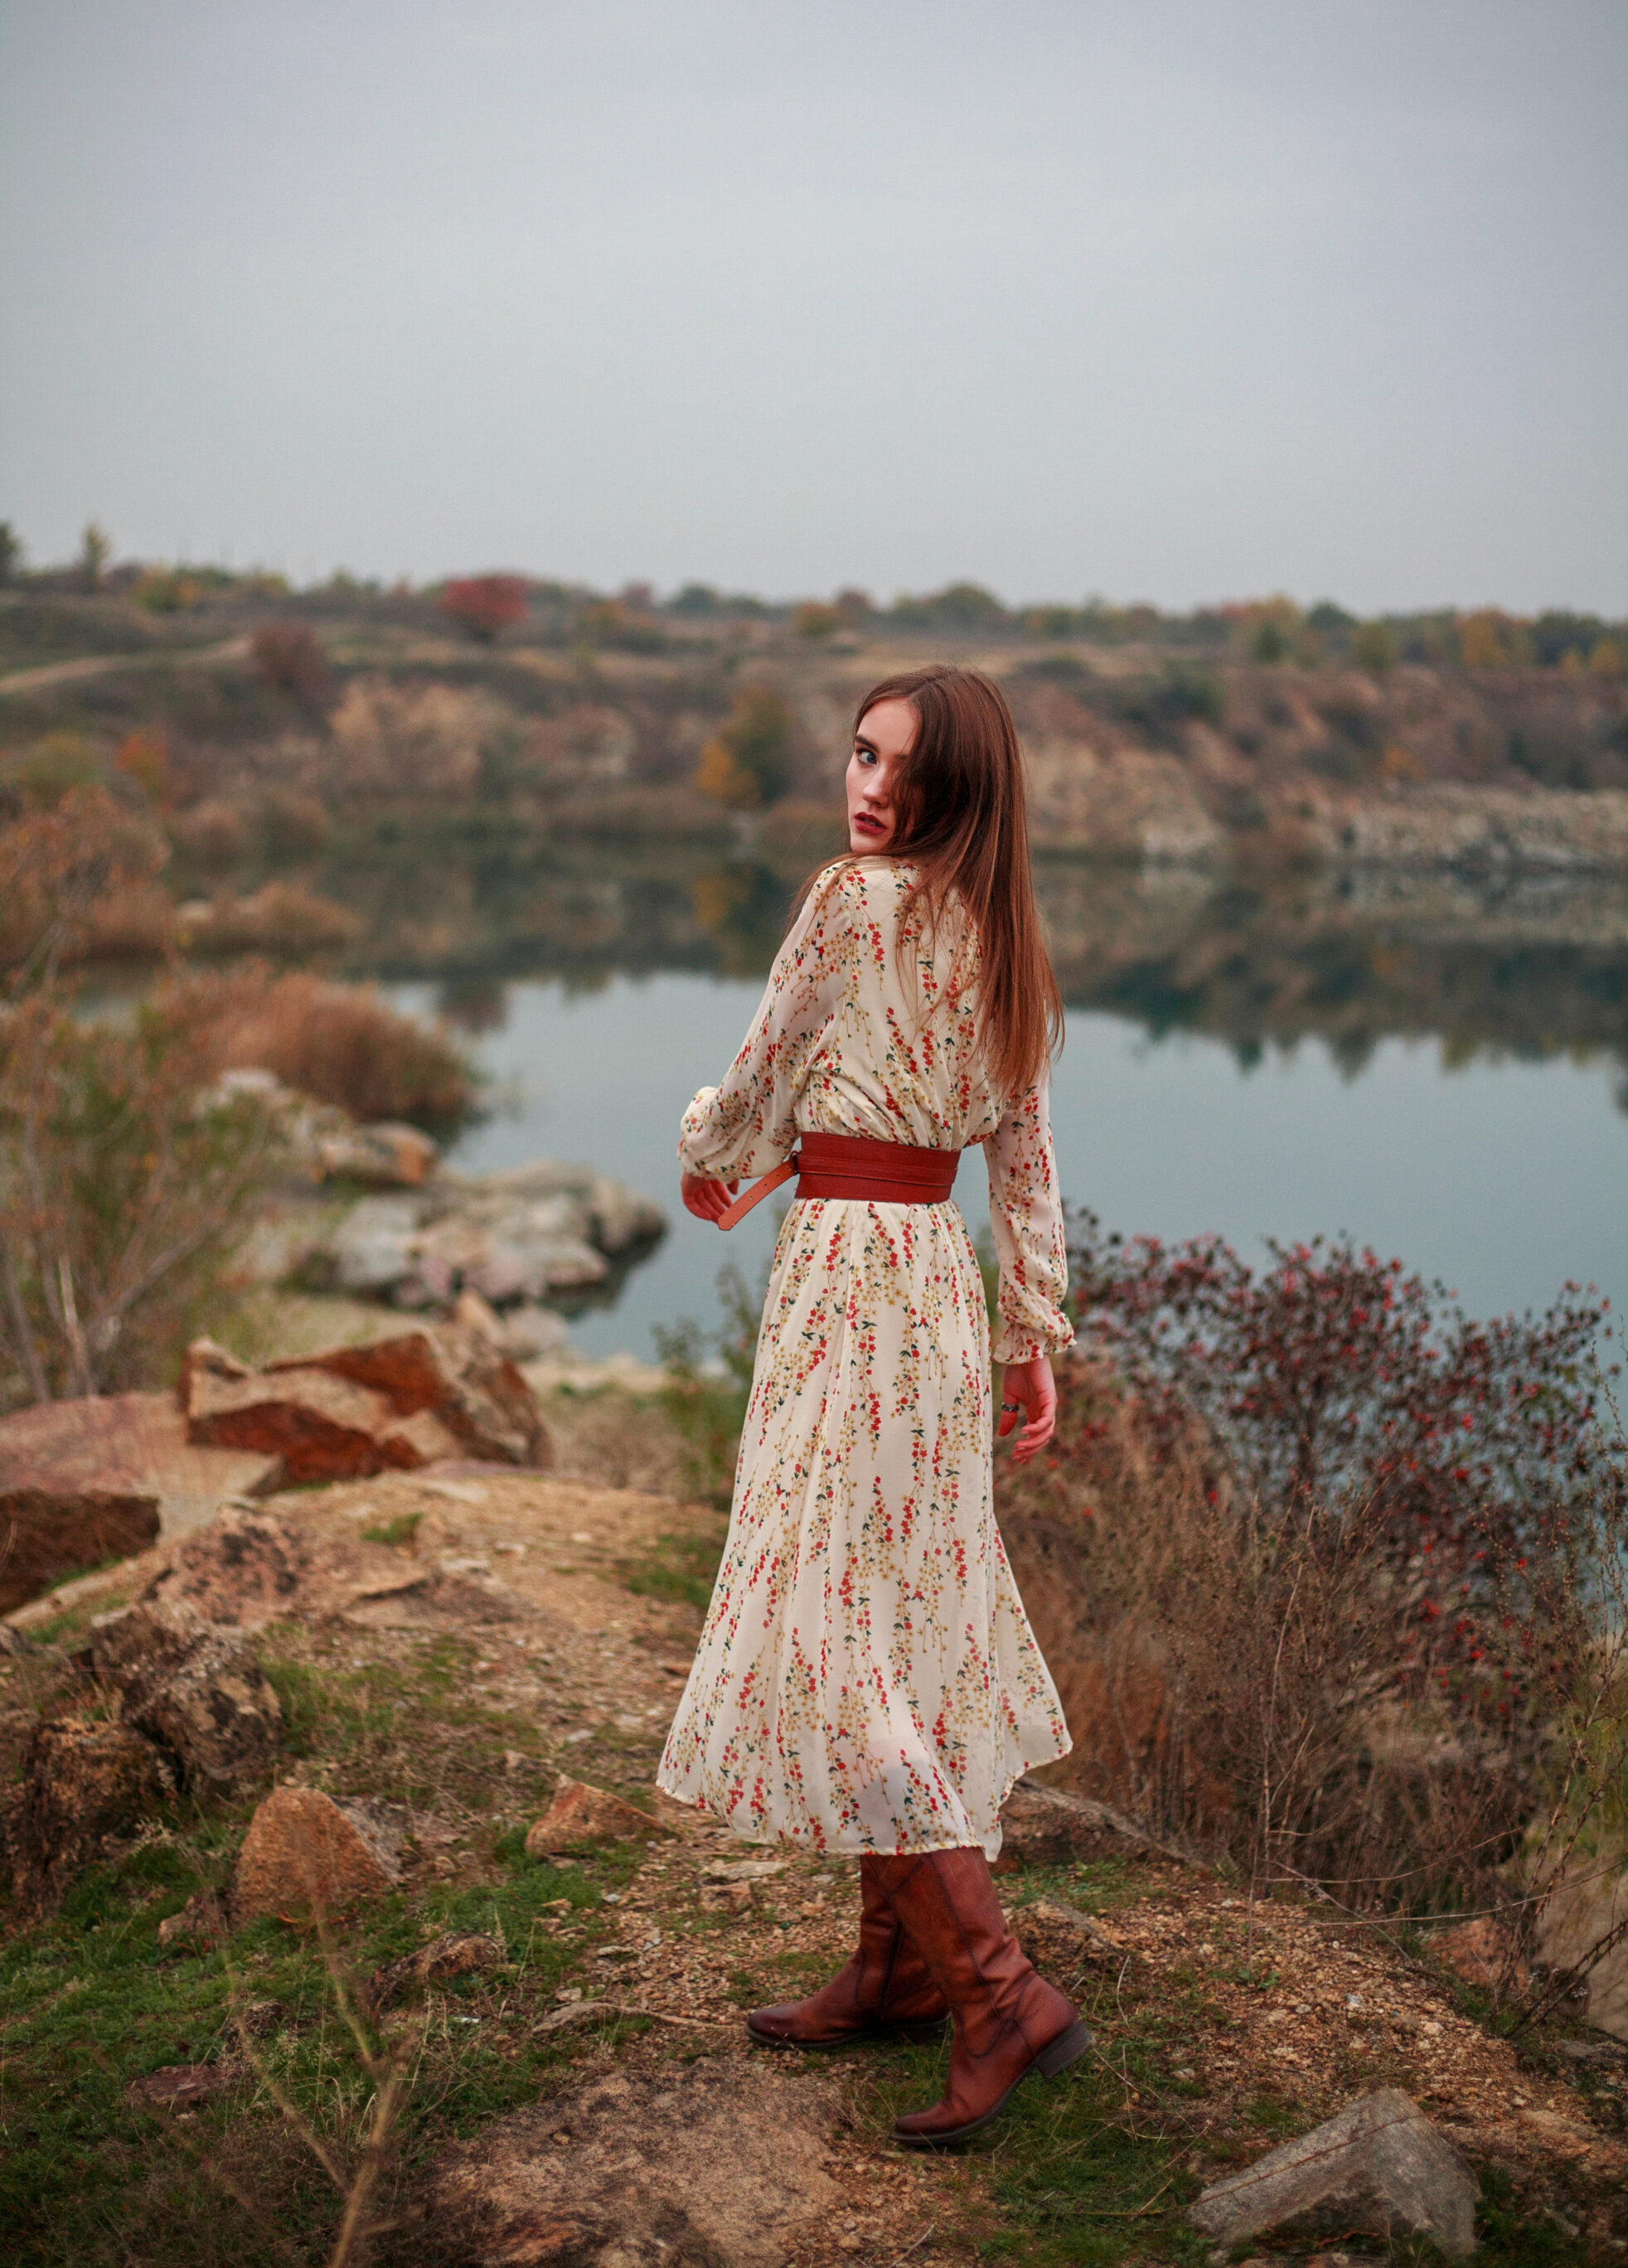 Brown Boots Matched With Floral Dress